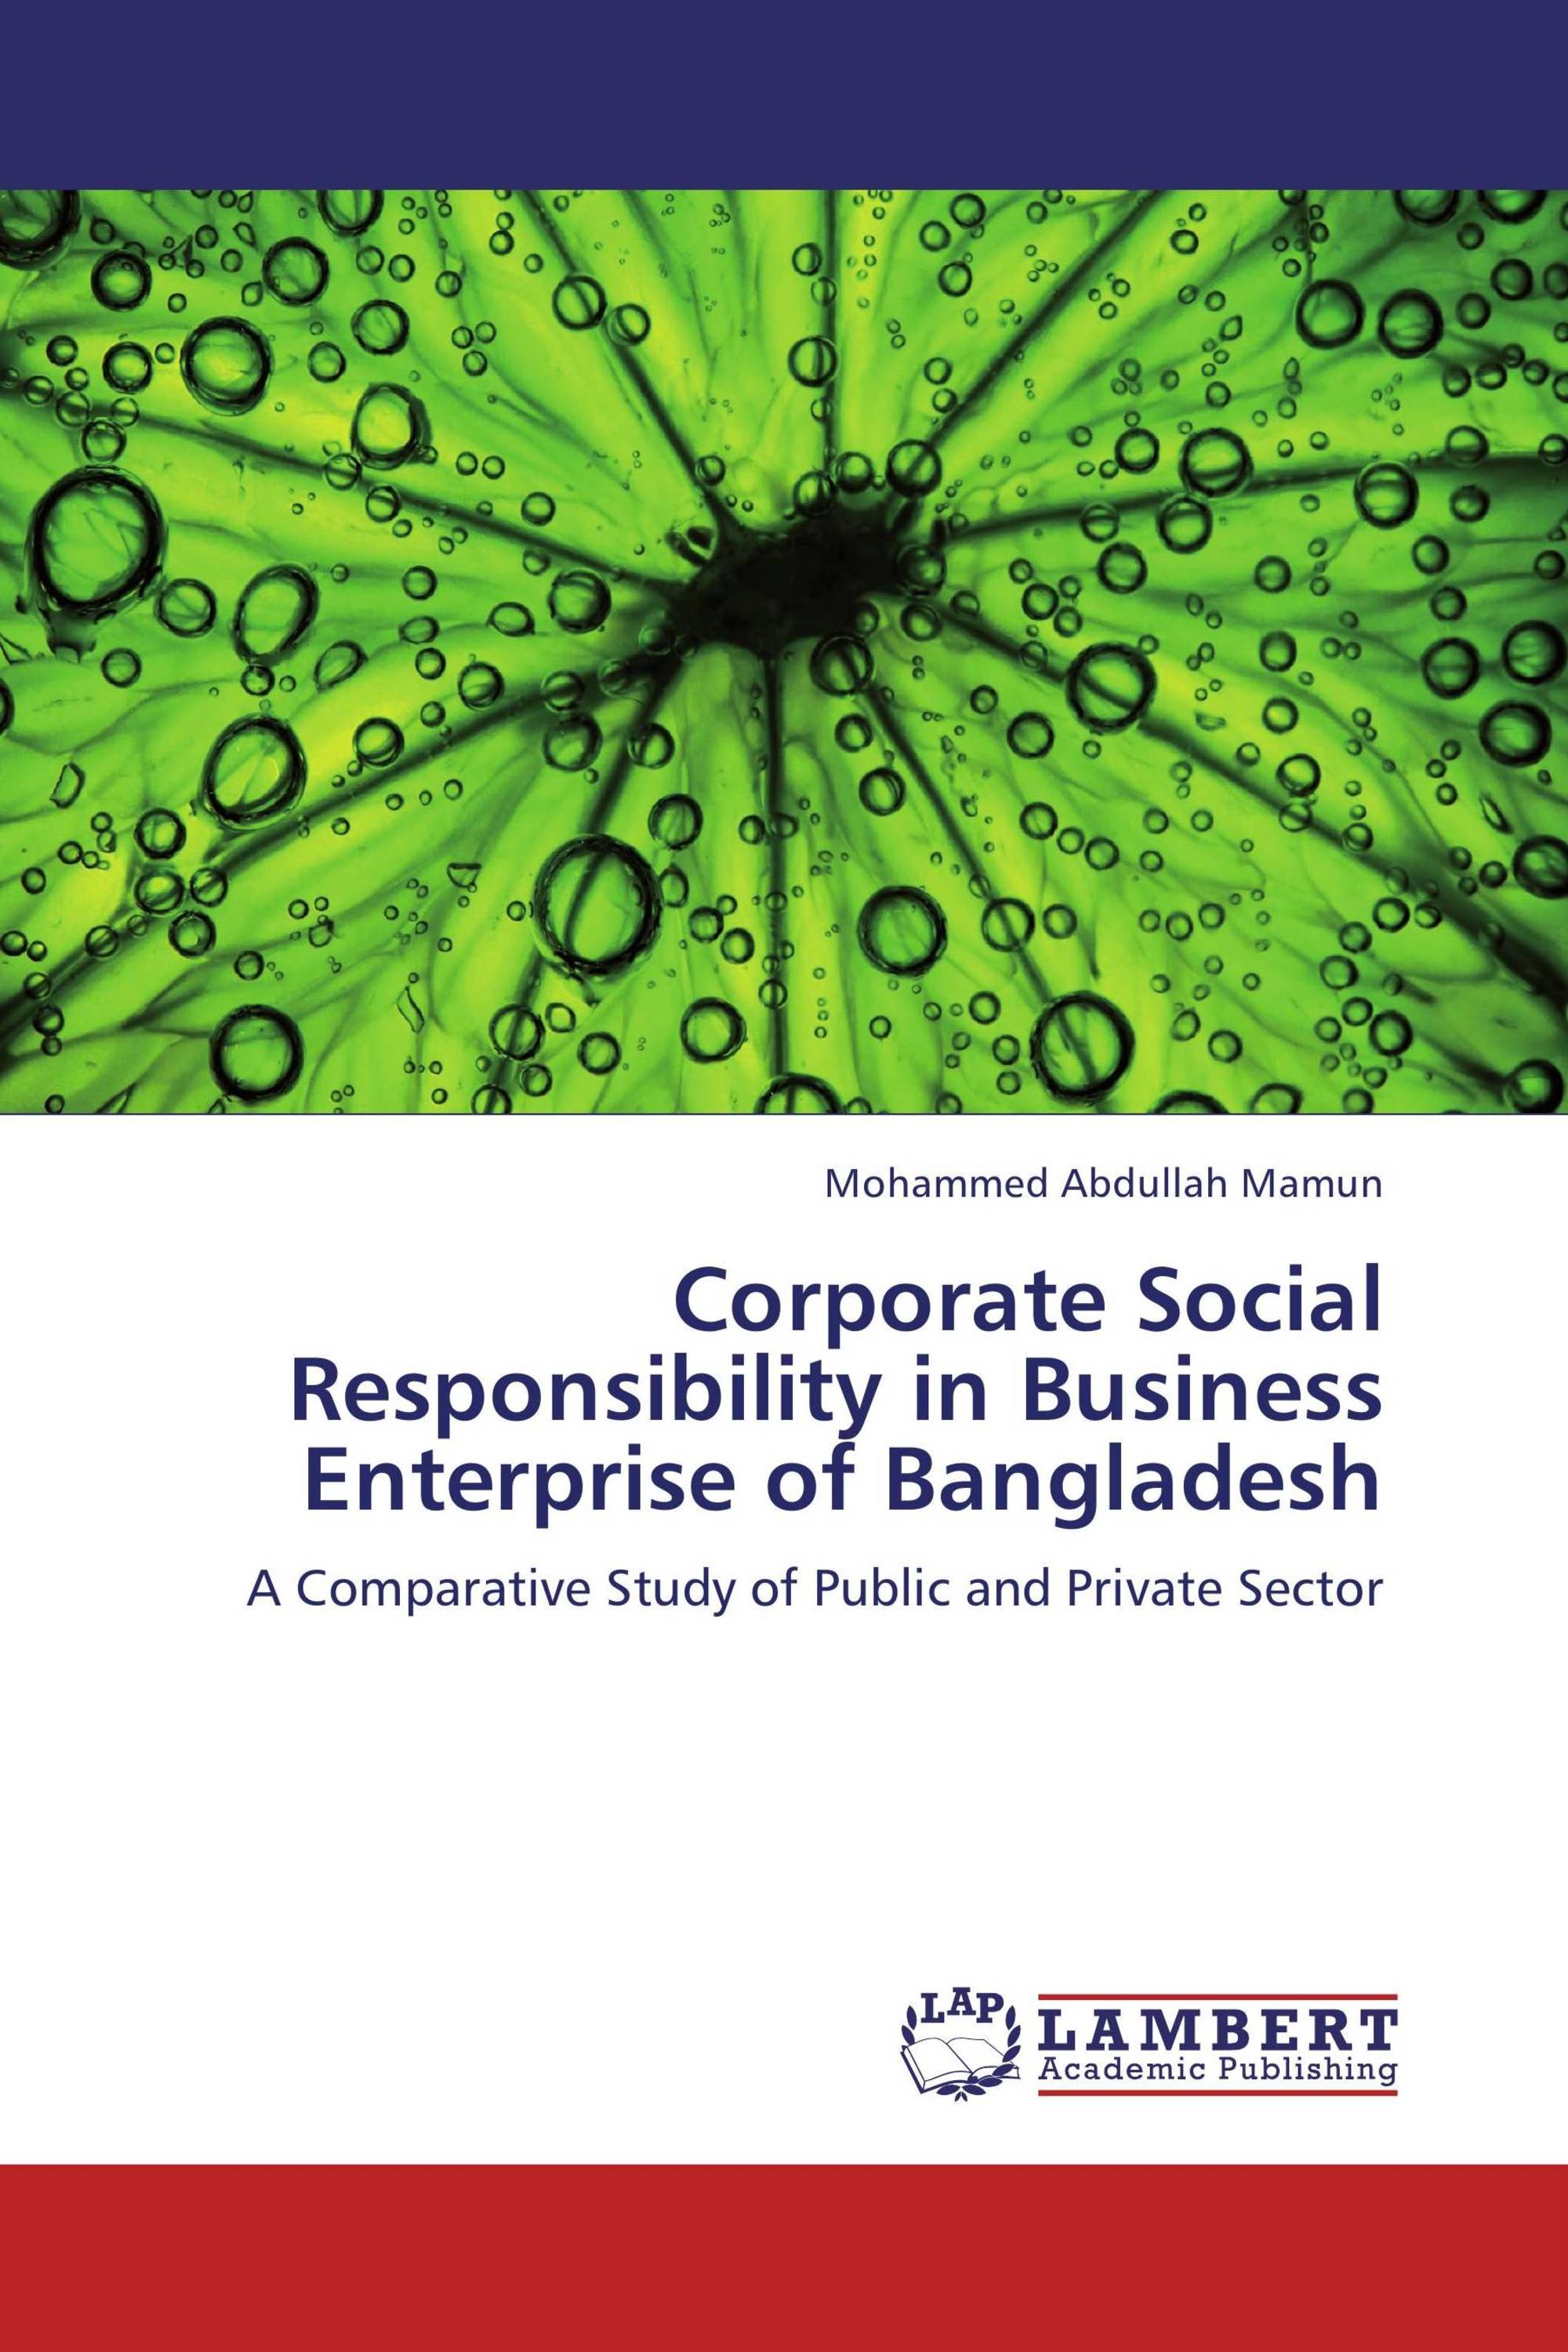 assignment on corporate social responsibility in bangladesh